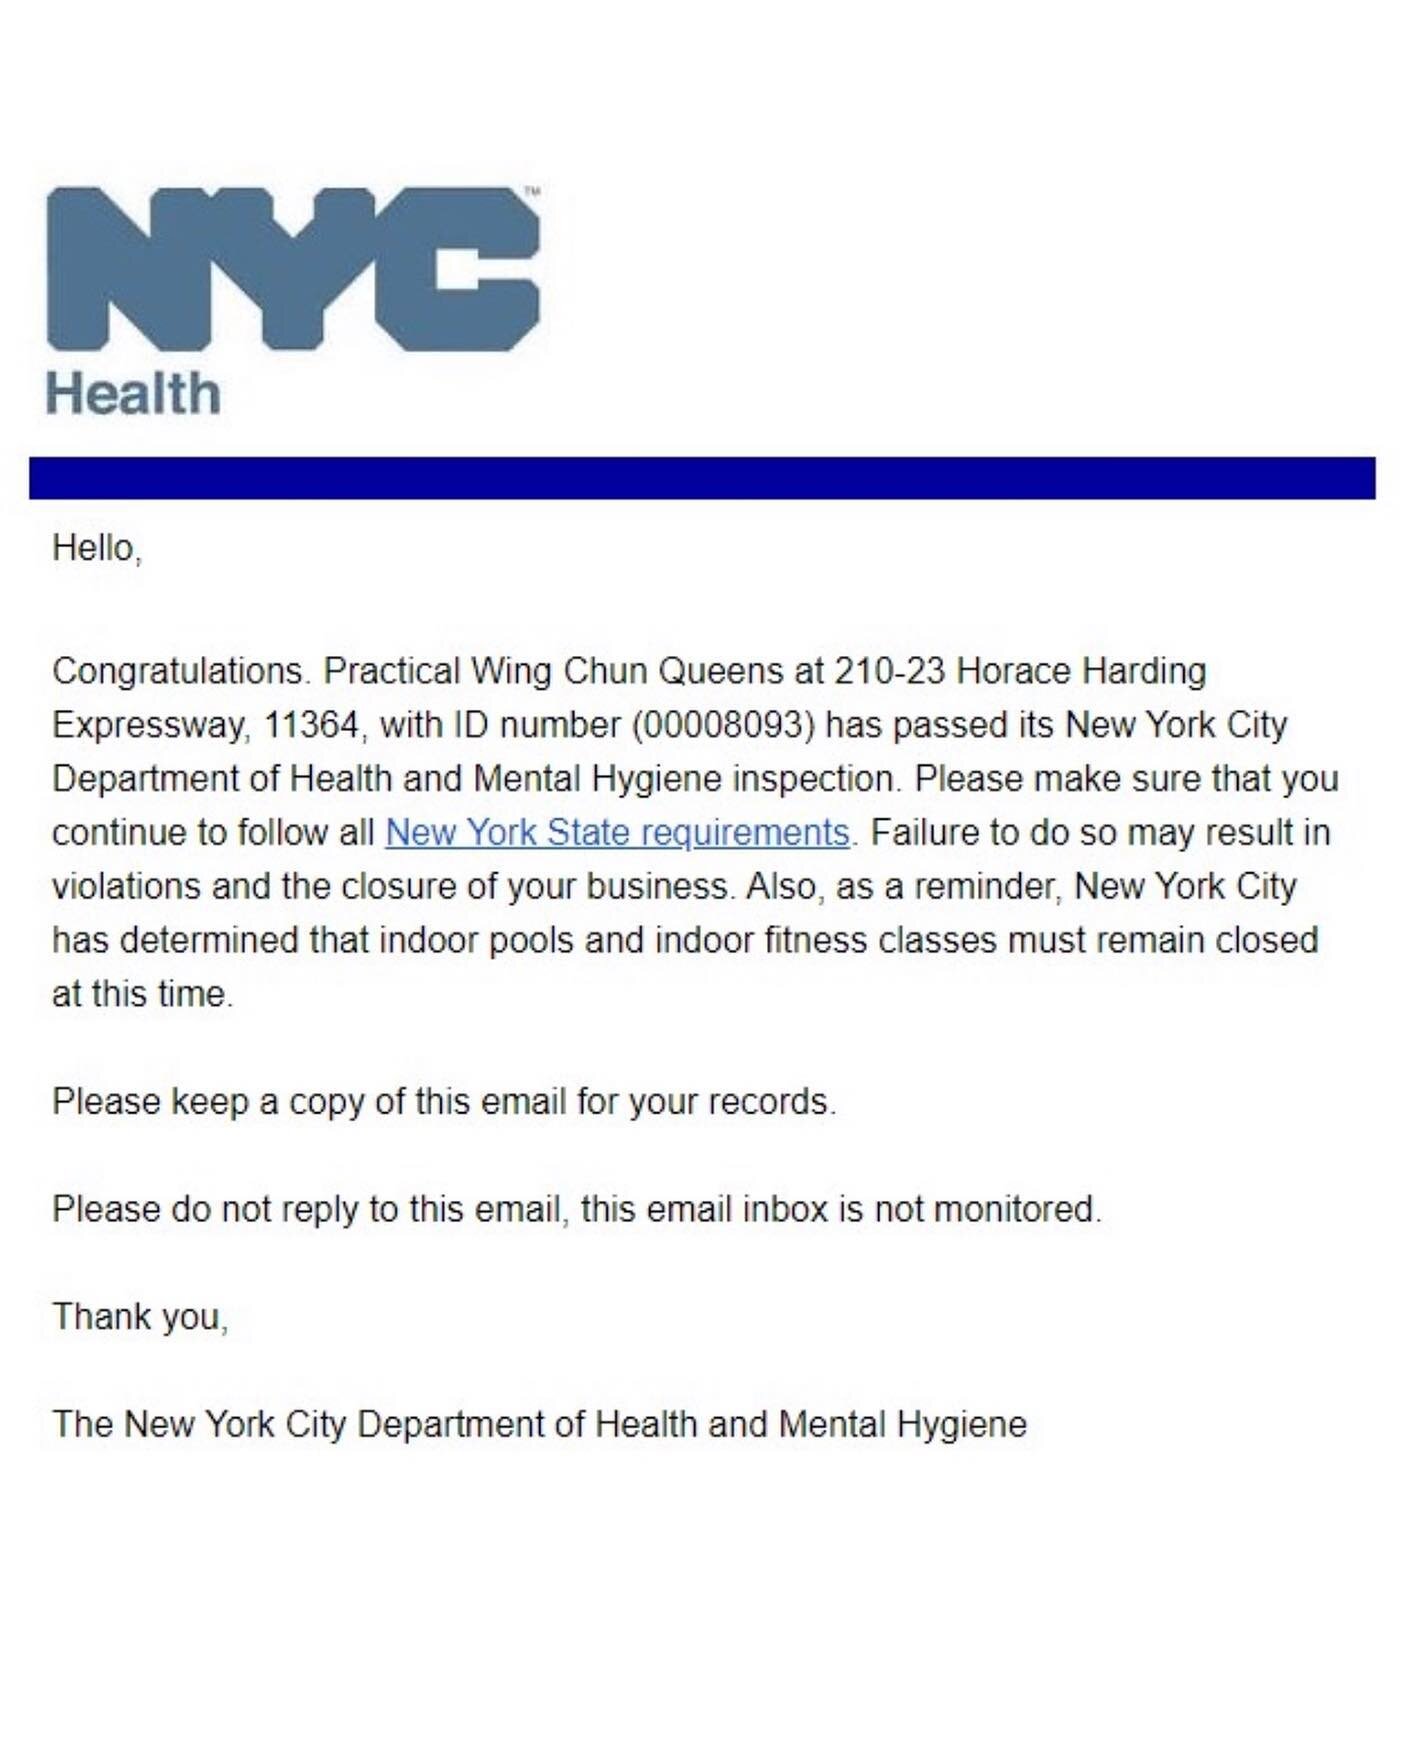 Fantastic news🎉🎉We passed our NYC Department of Health and Mental Hygiene inspection and are now officially open!
⠀⠀⠀⠀⠀⠀⠀⠀⠀
Please contact us by email or text if you're interested in training🤗
⠀⠀⠀⠀⠀⠀⠀⠀⠀
📧 info@practicalwingchunqueens.com
📱(718) 